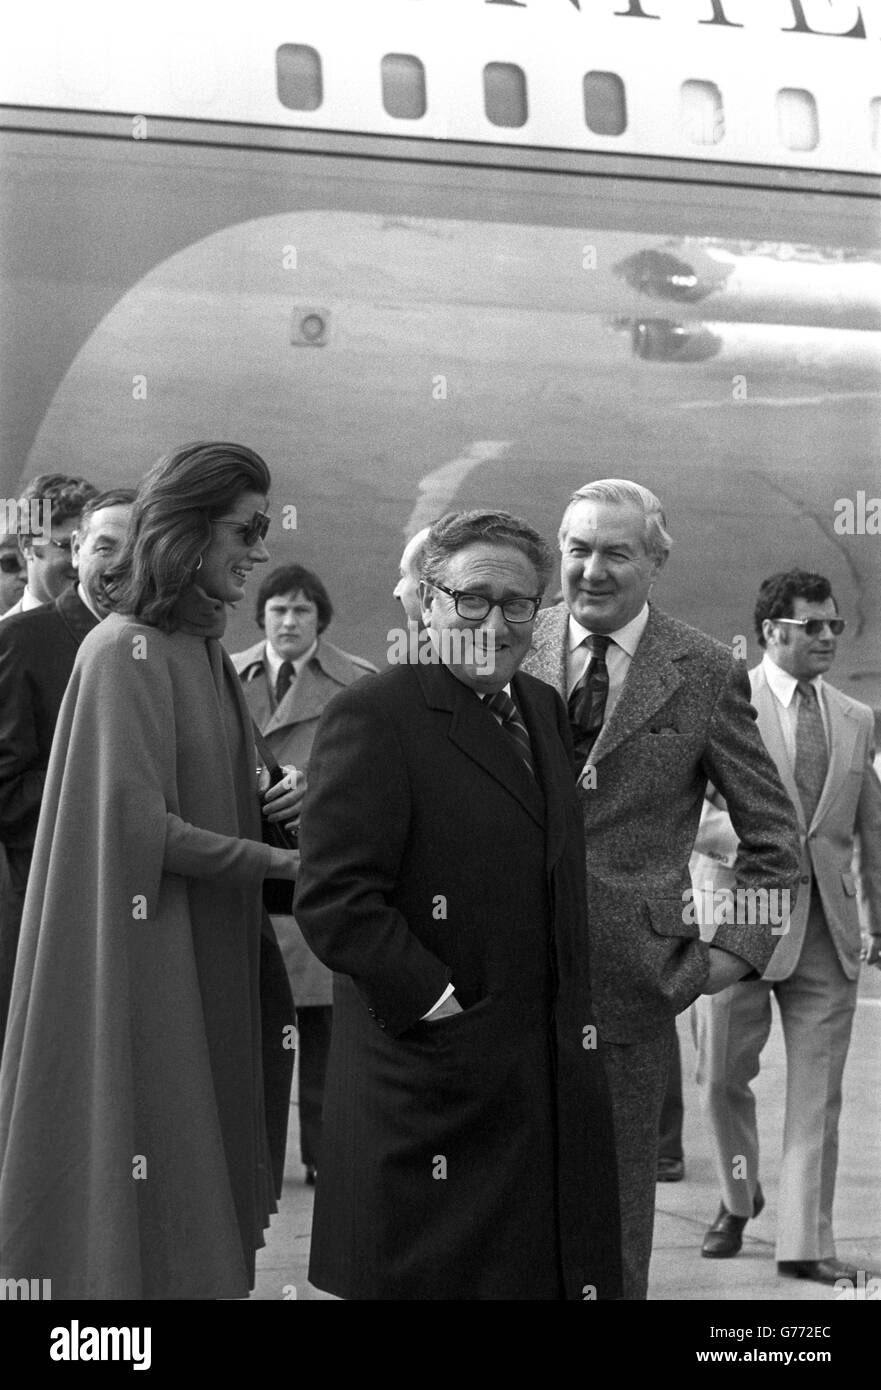 U.S Secretary of State Dr Henry Kissinger and his wife Nancy, escorted by Foreign Secretary Mr James Callaghan (right) walk to the Kissingers' aircraft at Heathrow airport this afternoon. Dr Kissinger, en route to Washington from his abortive efforts to reach an interim peace agreement in the Middle East, had talks with Mr Callaghan in the Queens Lounge at the airport. Stock Photo